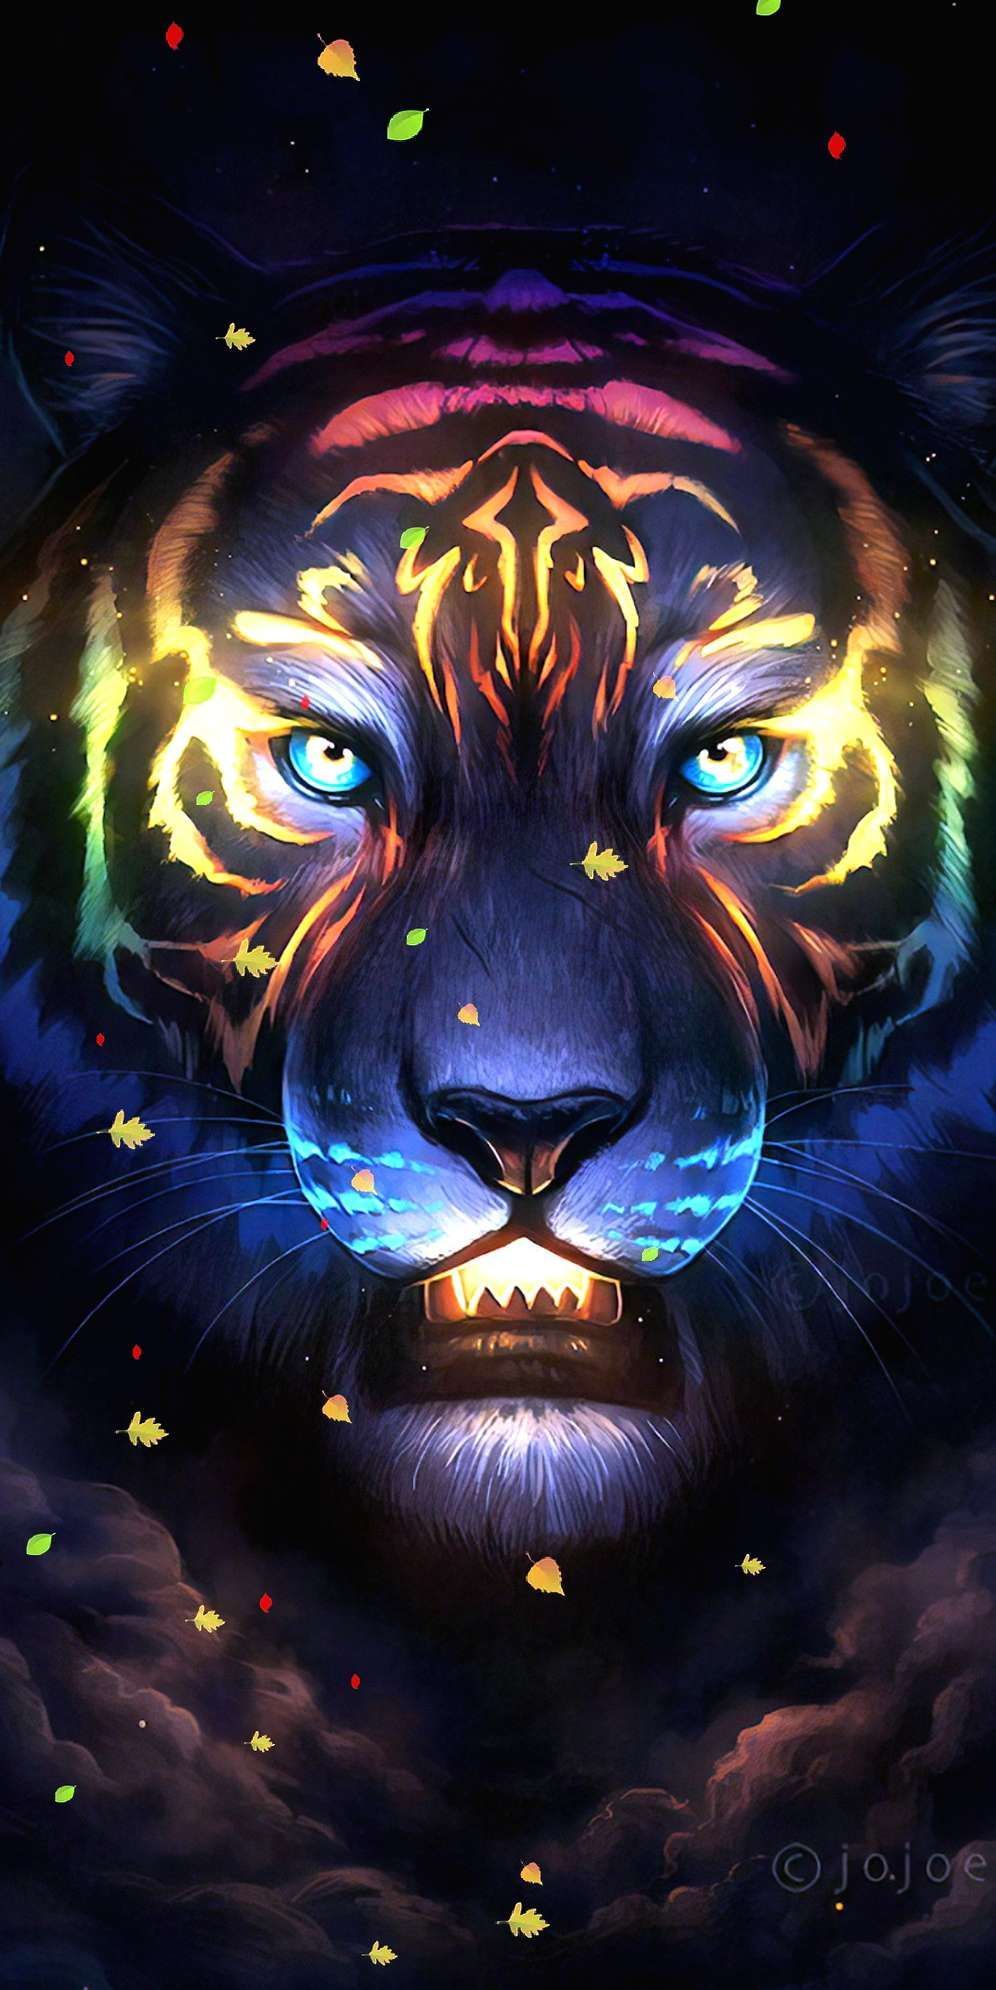 iPhone Wallpaper for iPhone iPhone 8 Plus, iPhone 6s, iPhone 6s Plus, iPhone X and iPod Touch High Quality Wal. Lion wallpaper iphone, Tiger art, Tiger image